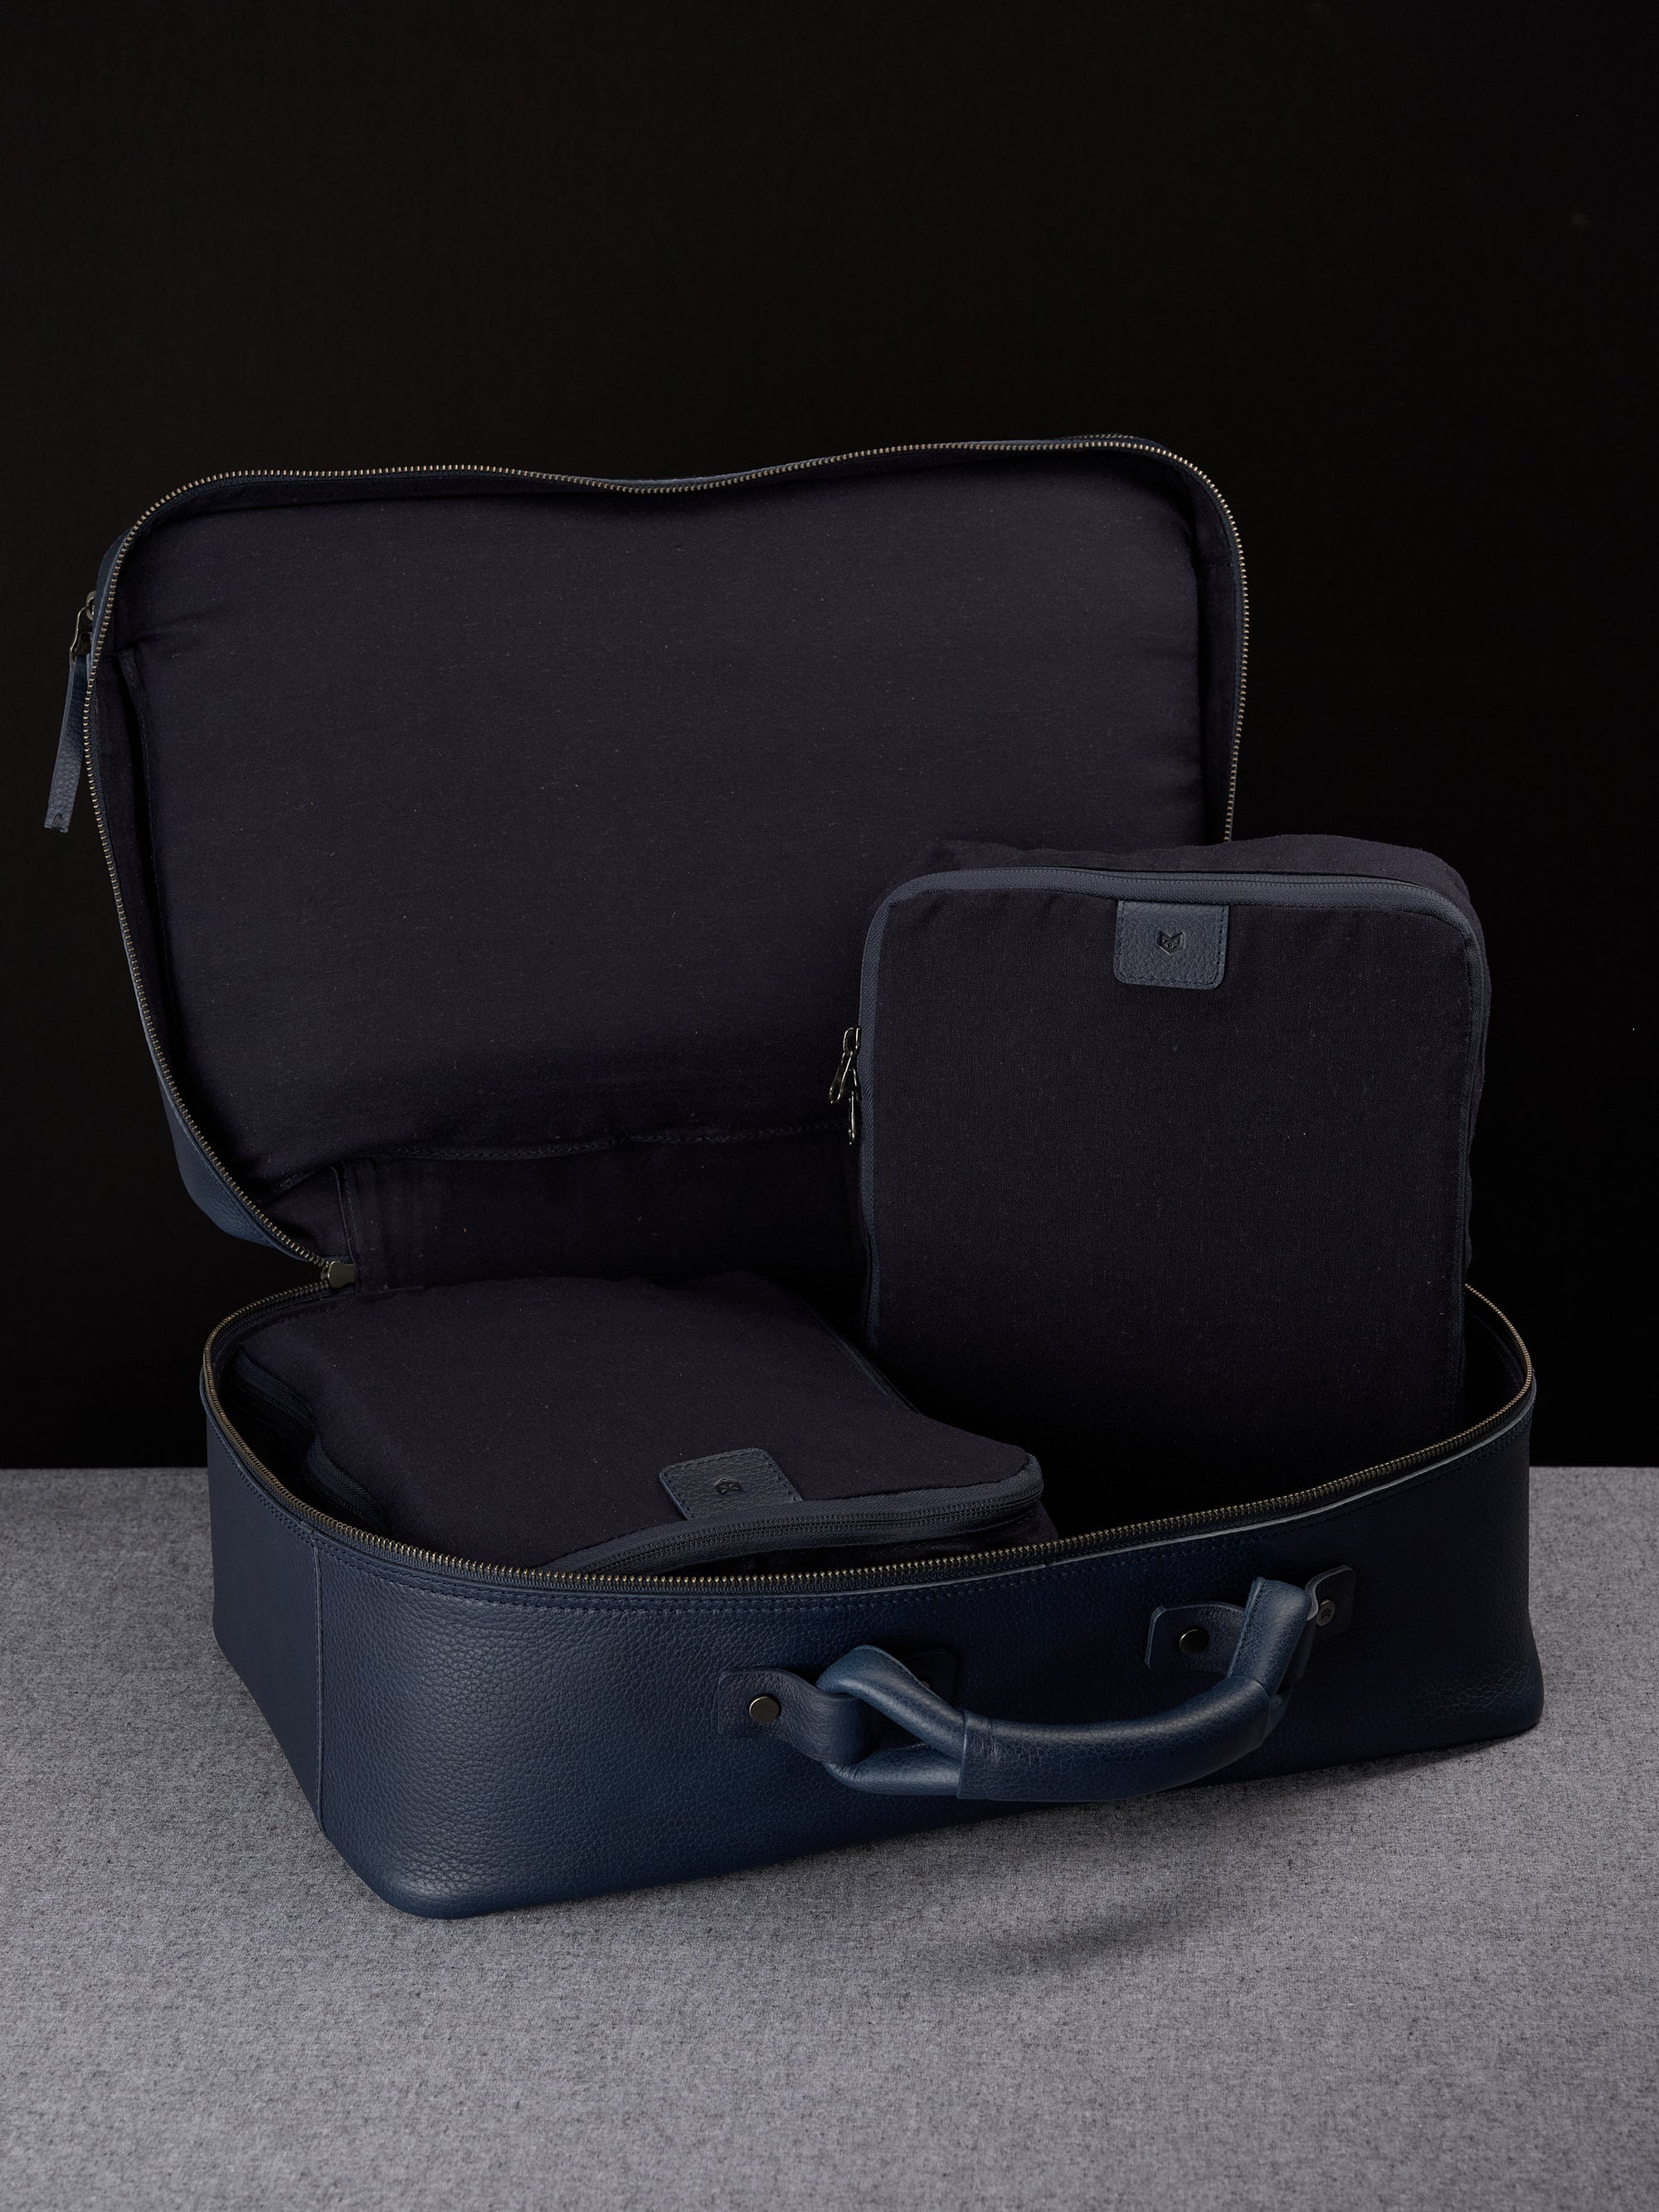 Leather duffle bag navy with shoulder strap by Capra